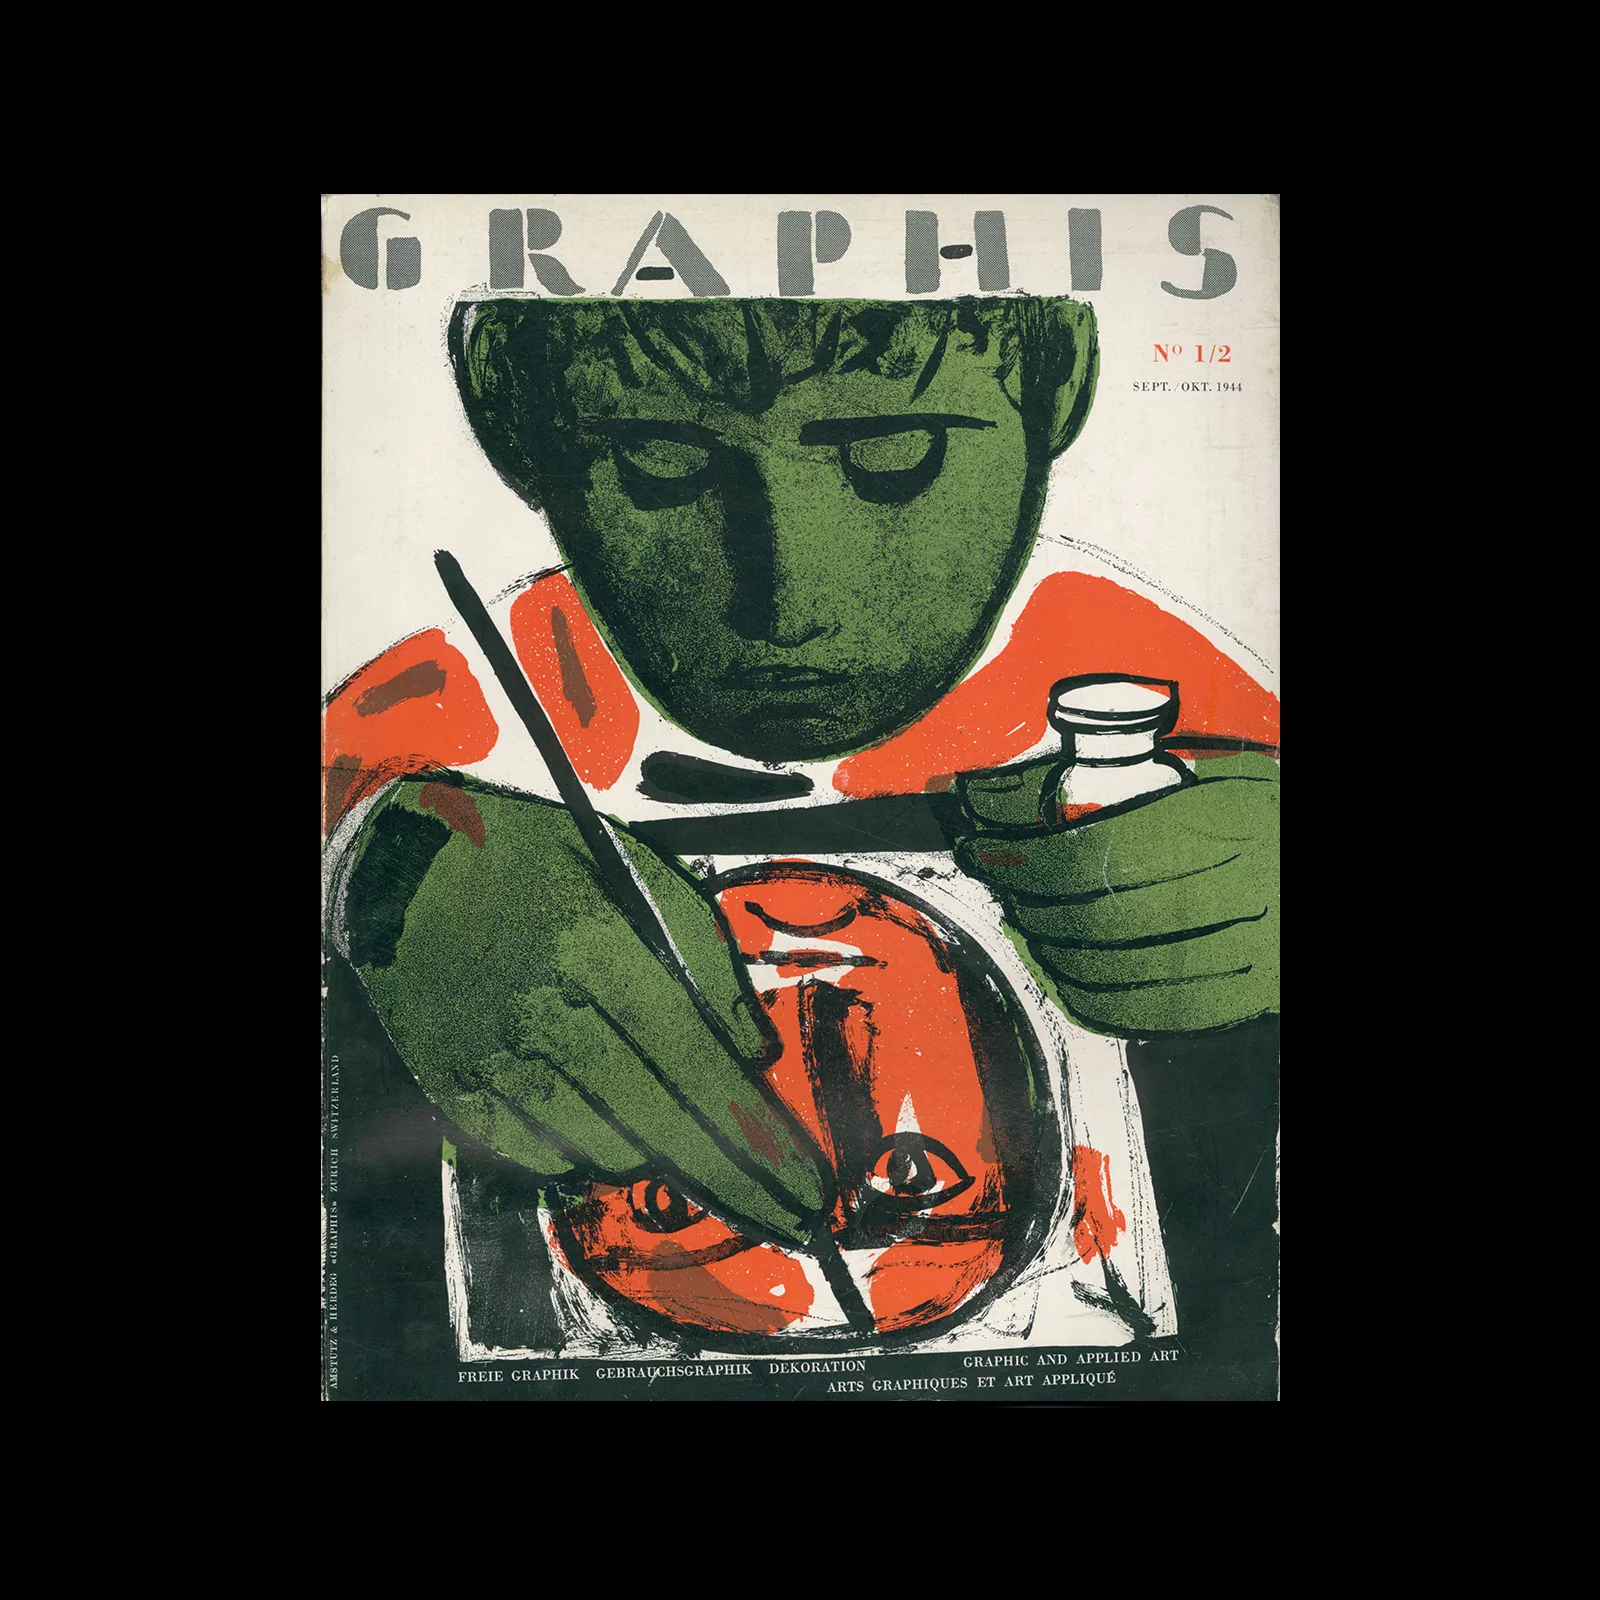 Graphis 01-02, 1944. Cover design by Max Hunziker